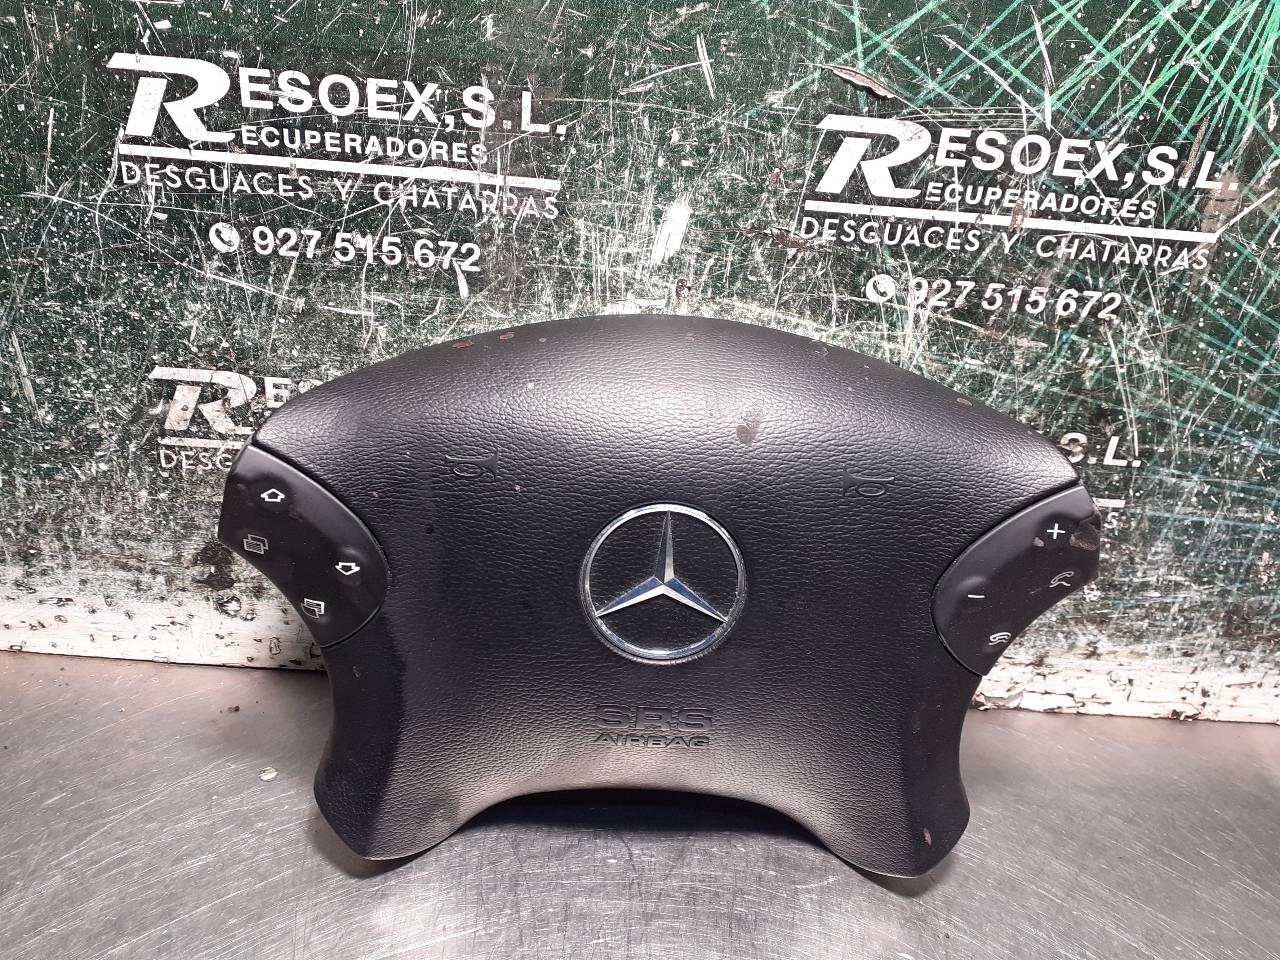 MERCEDES-BENZ C-Class W203/S203/CL203 (2000-2008) Other Control Units 2034601898 18924925